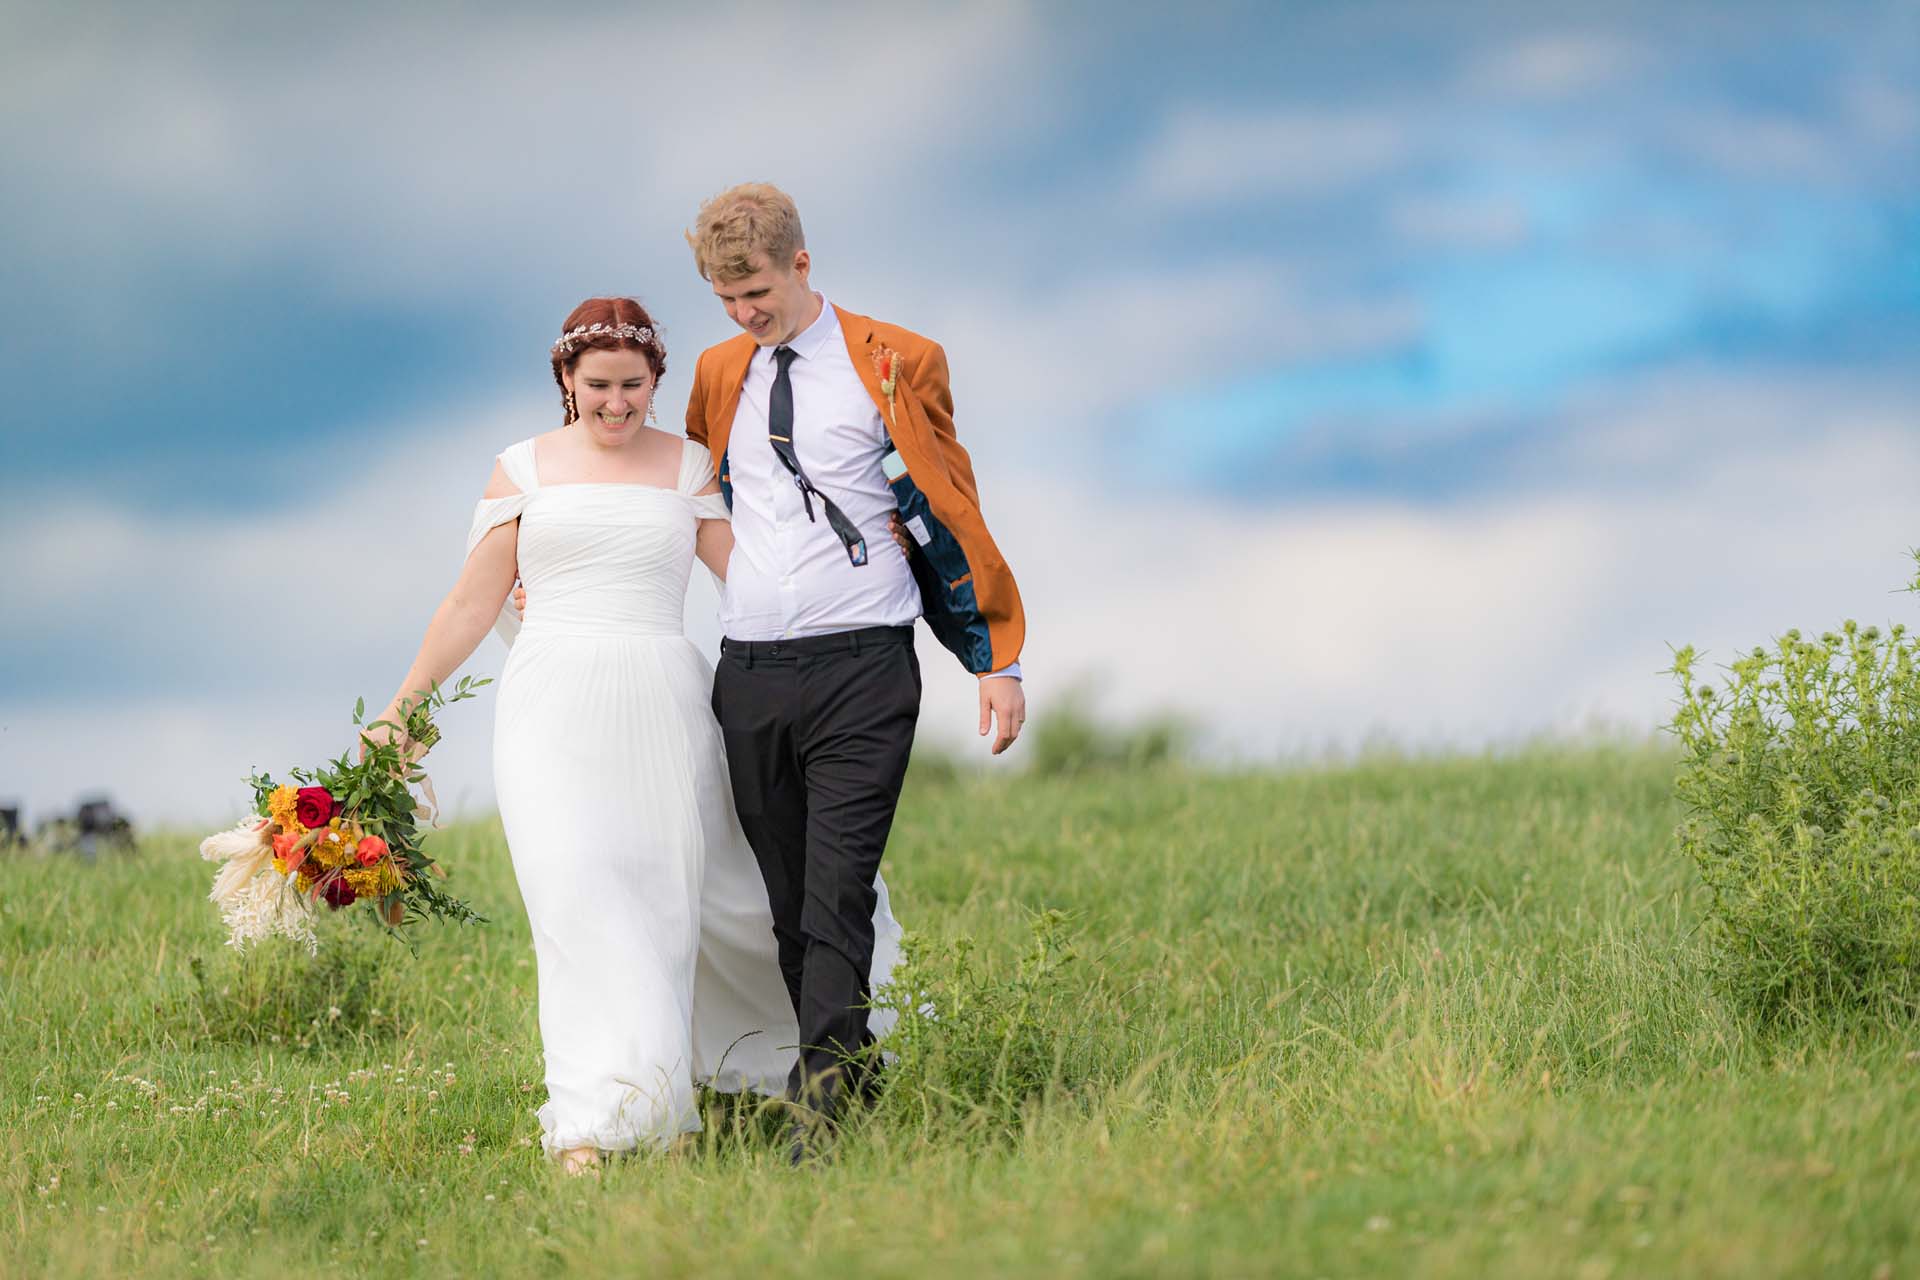 Coventry Warwickshire wedding Kent wedding photography based in Bromley South London 170309